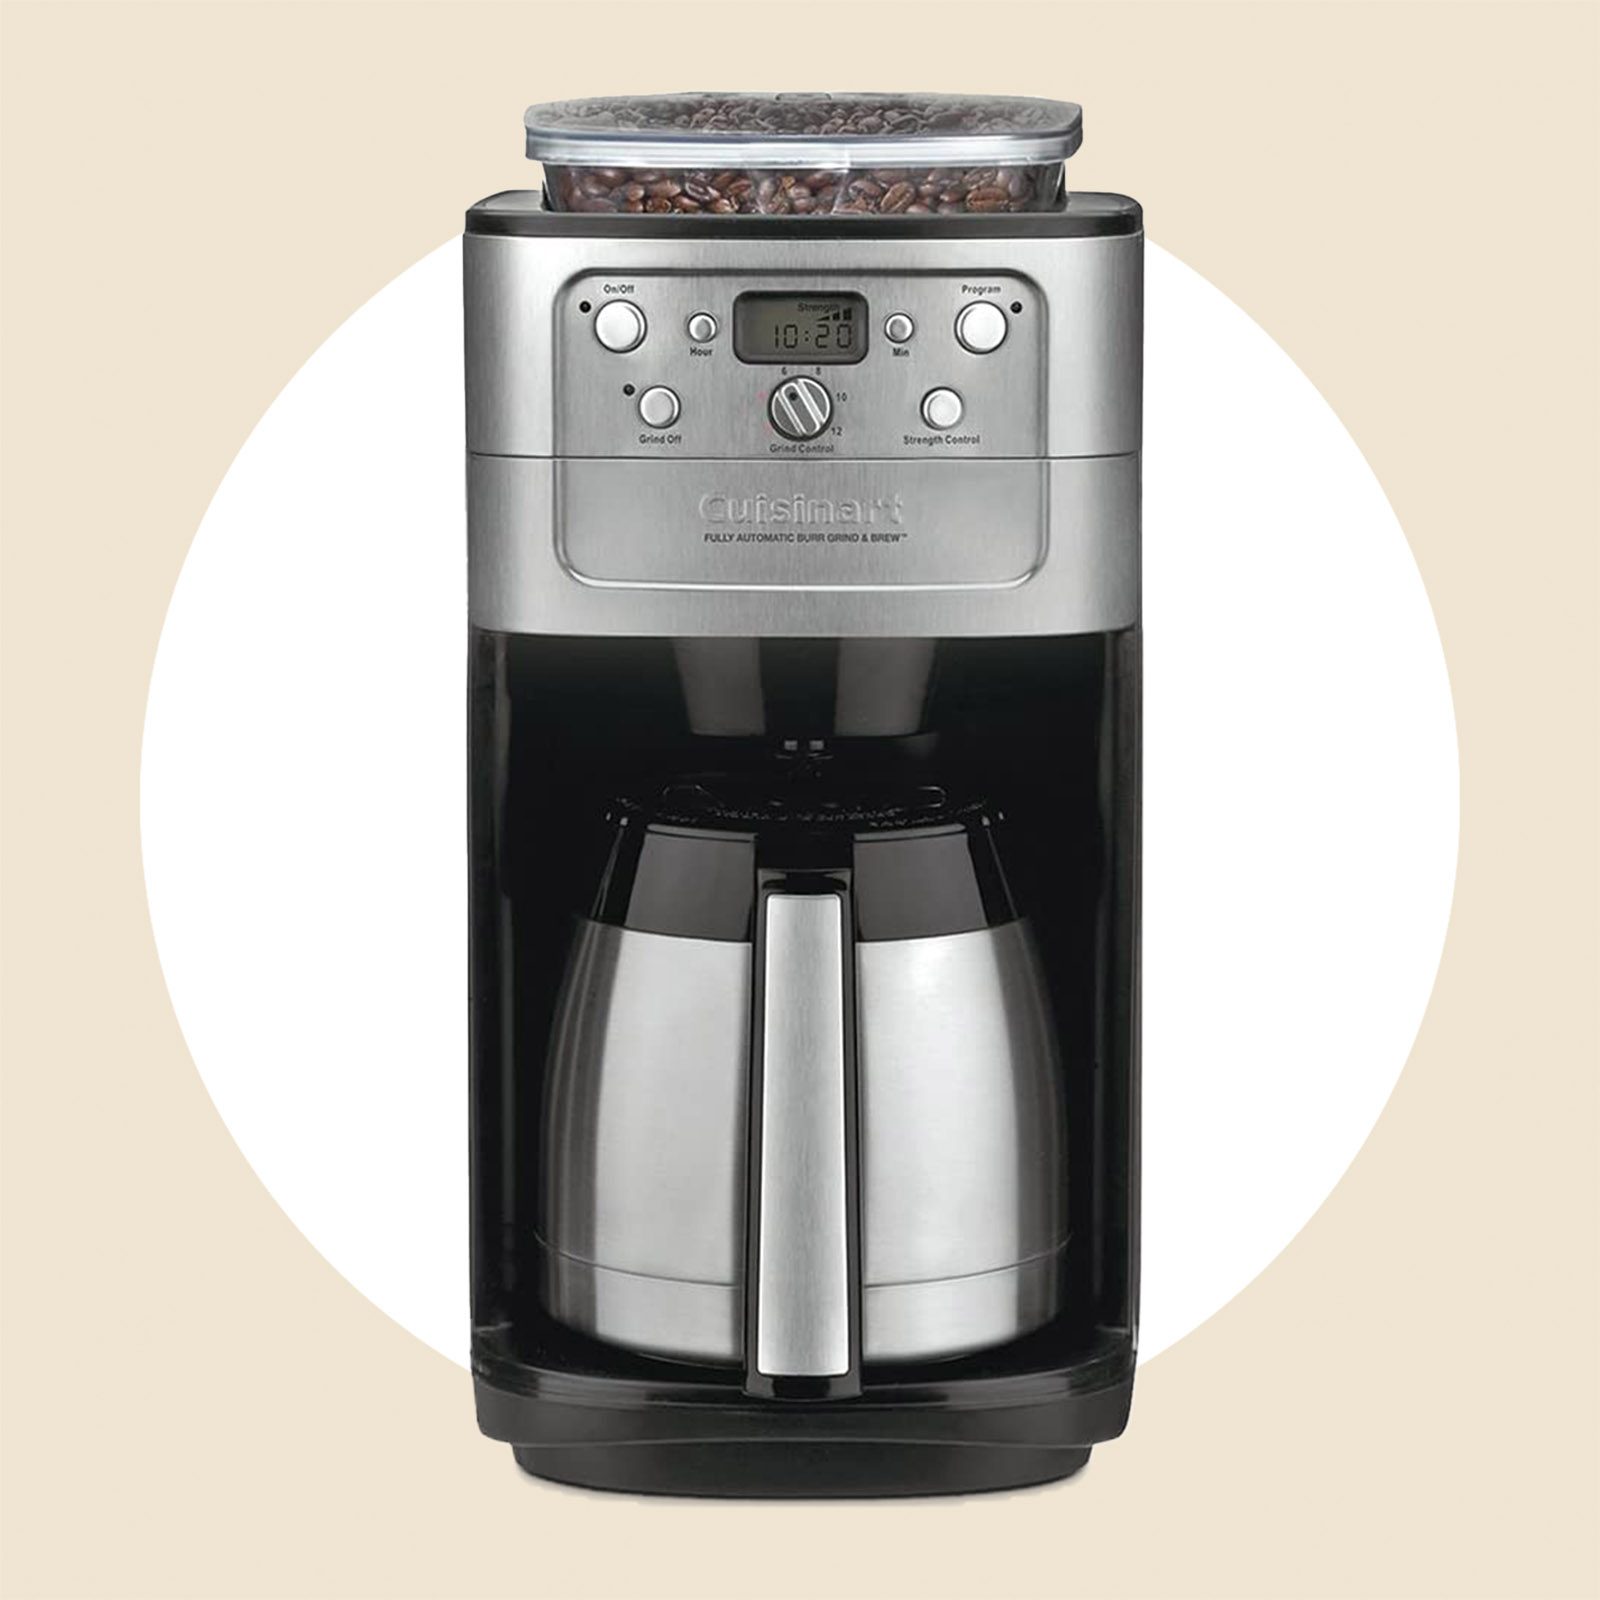 PowerXL Grind and Go Plus Coffee Maker, Automatic Single-Serve Coffee Machine with 16-oz